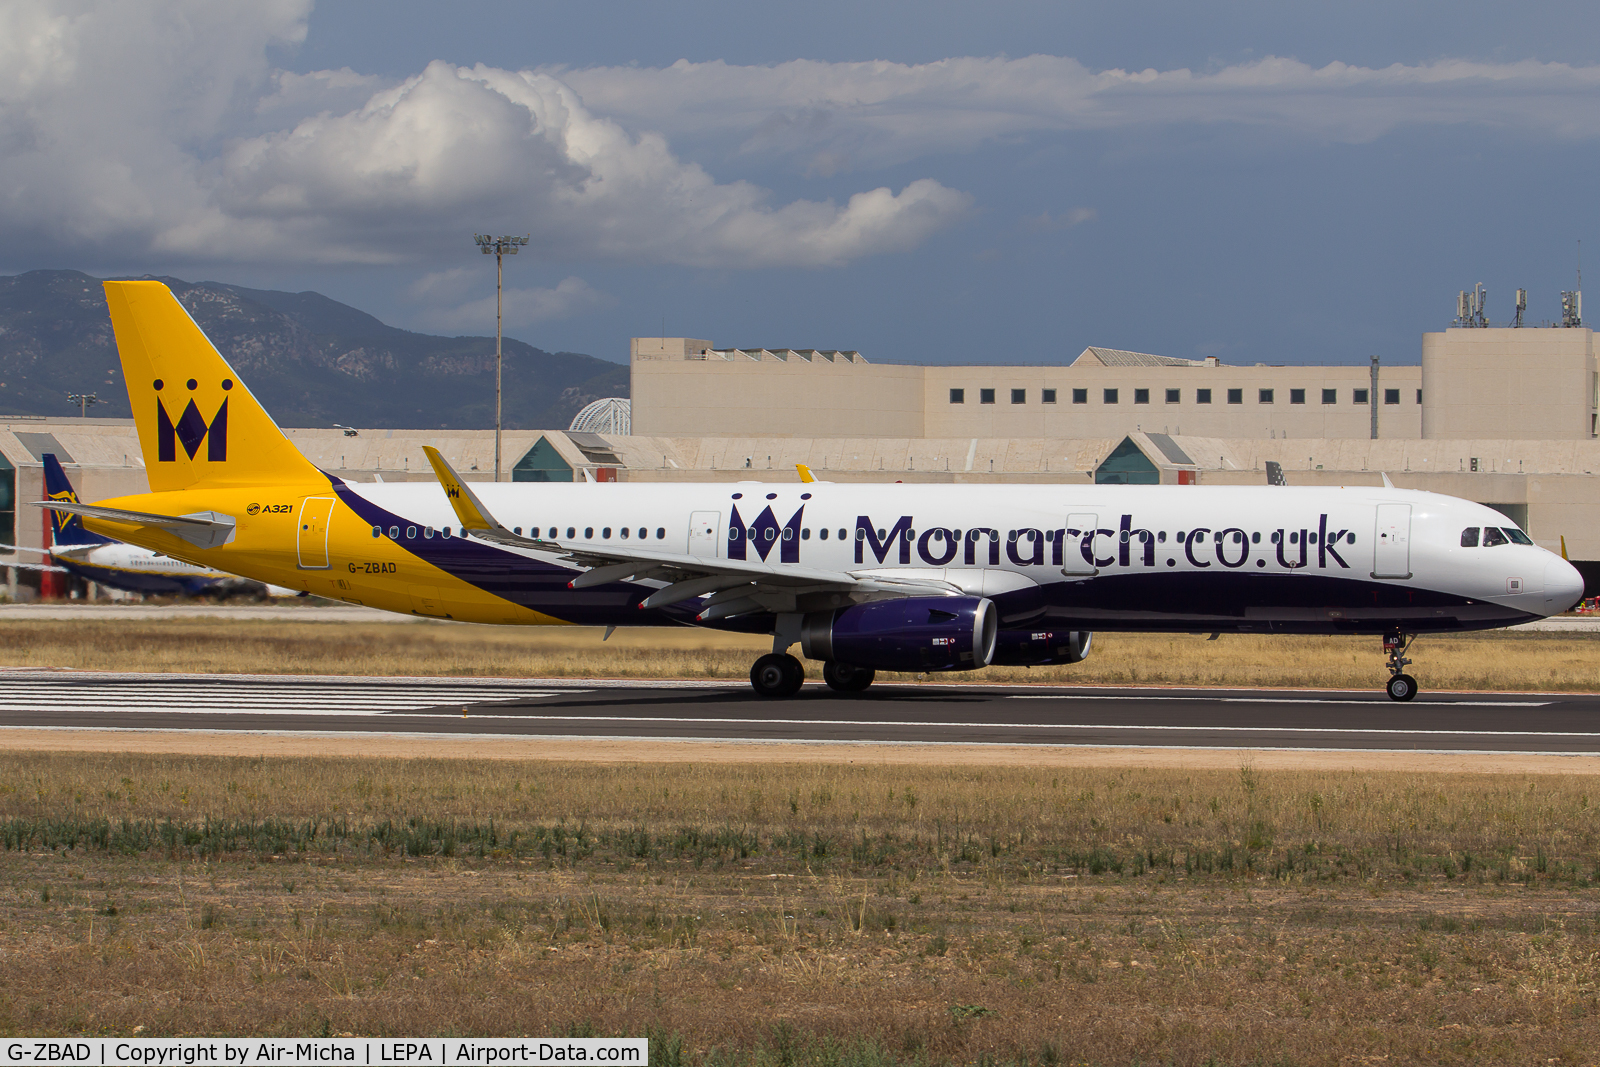 G-ZBAD, 2013 Airbus A321-231 C/N 5582, Monarch Airlines